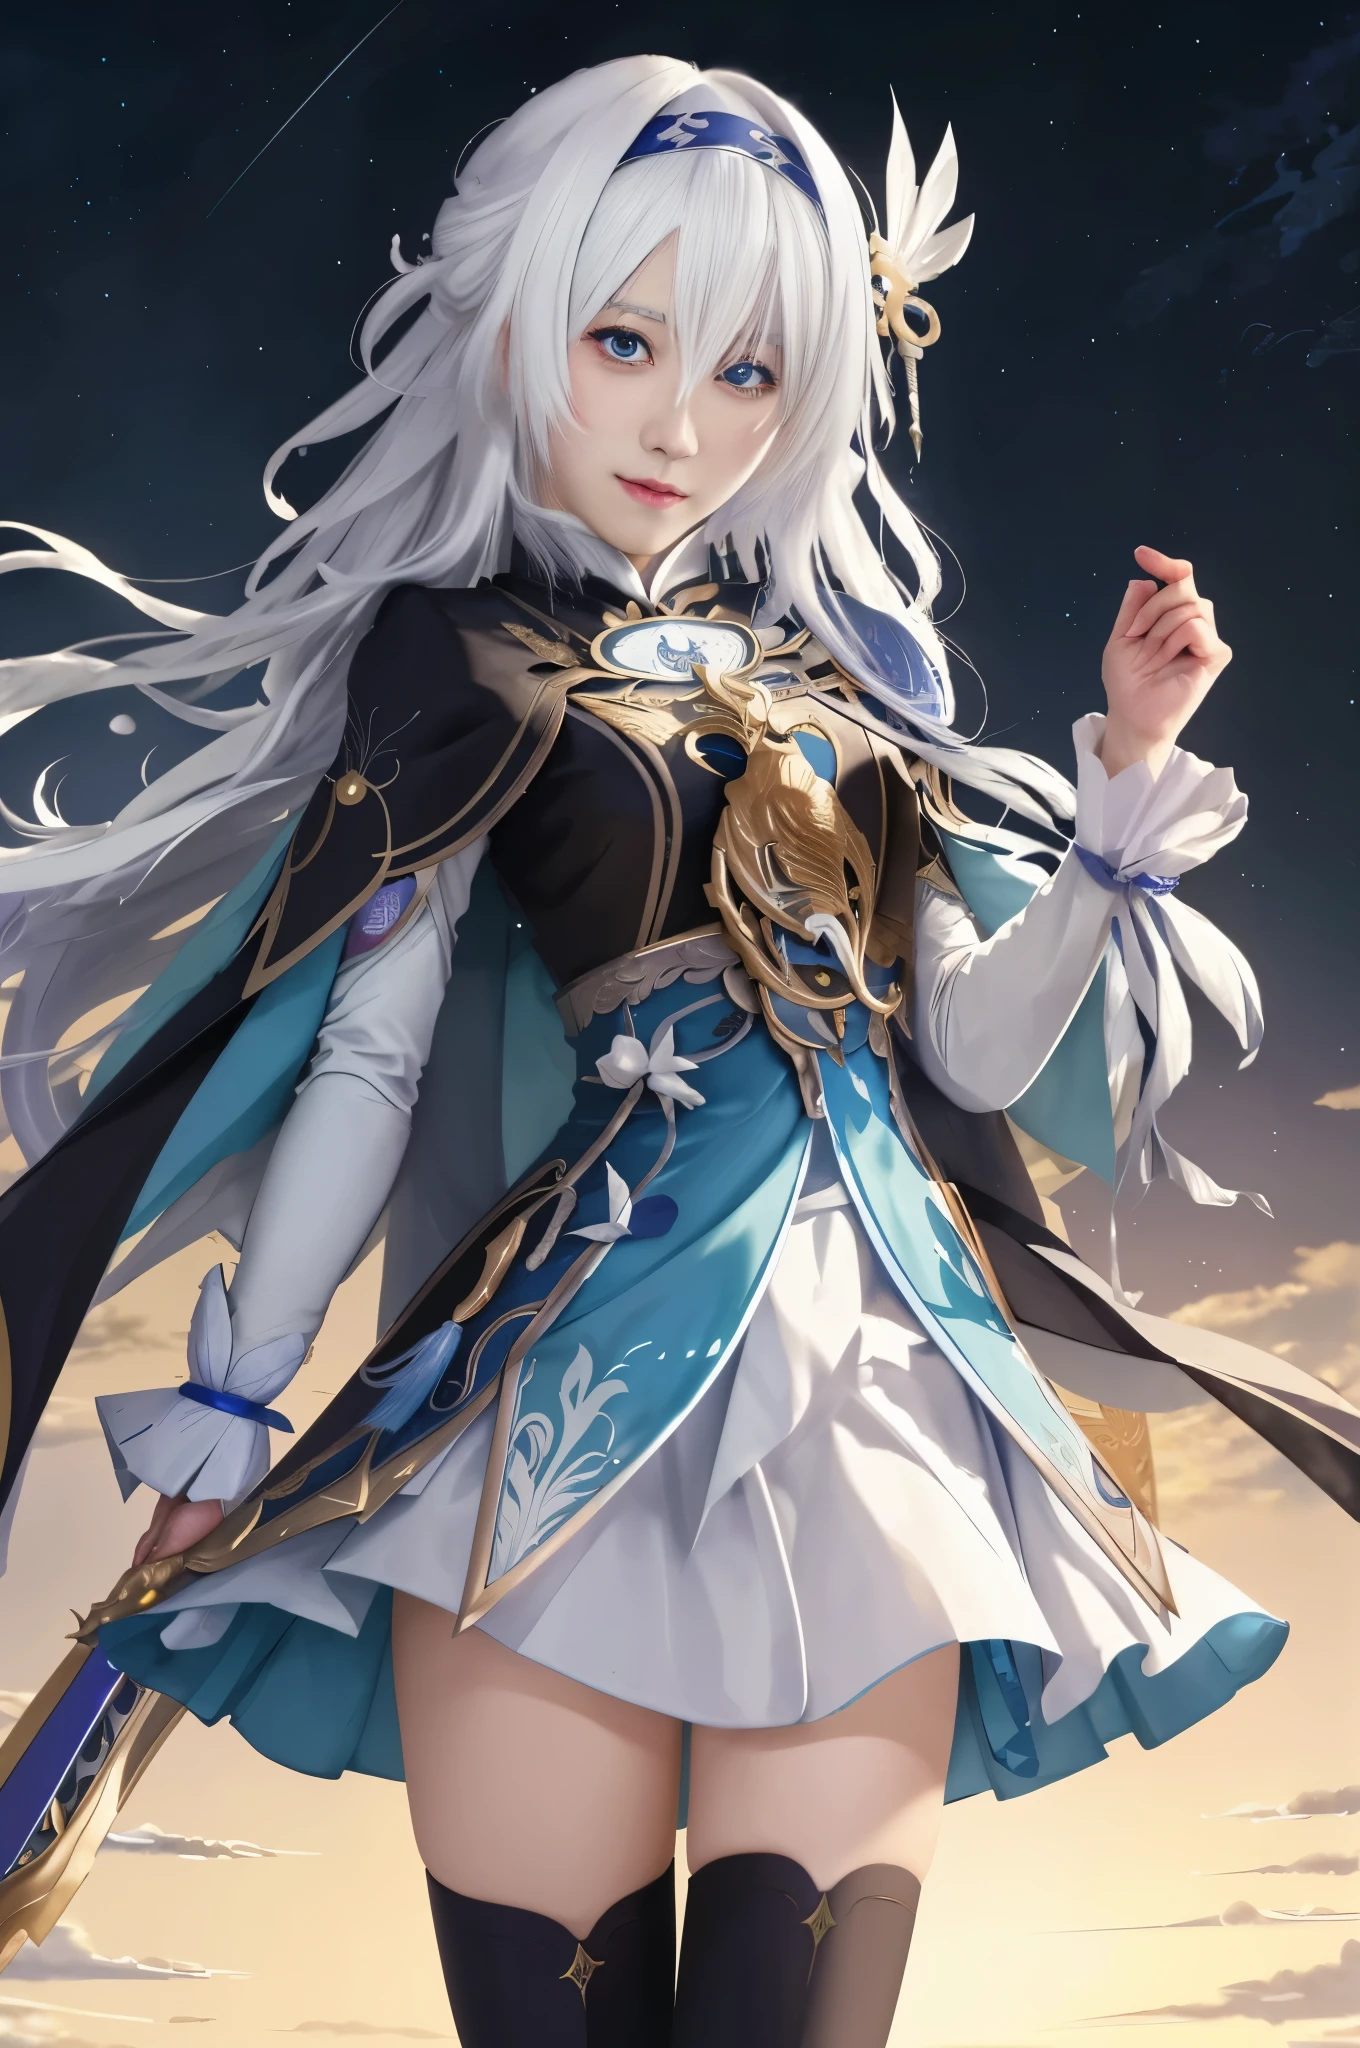 Close-up of a man with white hair and a sword, White-haired God, keqing from Genshin impact, ayaka Genshin impact, Beautiful celestial mage, Zodiac Girl Knight Portrait, shadow poetry style, Cute anime waifu wearing beautiful clothes, Genshin, perfect white haired girl, Detailed anime character art, Detailed key animation art, Astrie Lohne